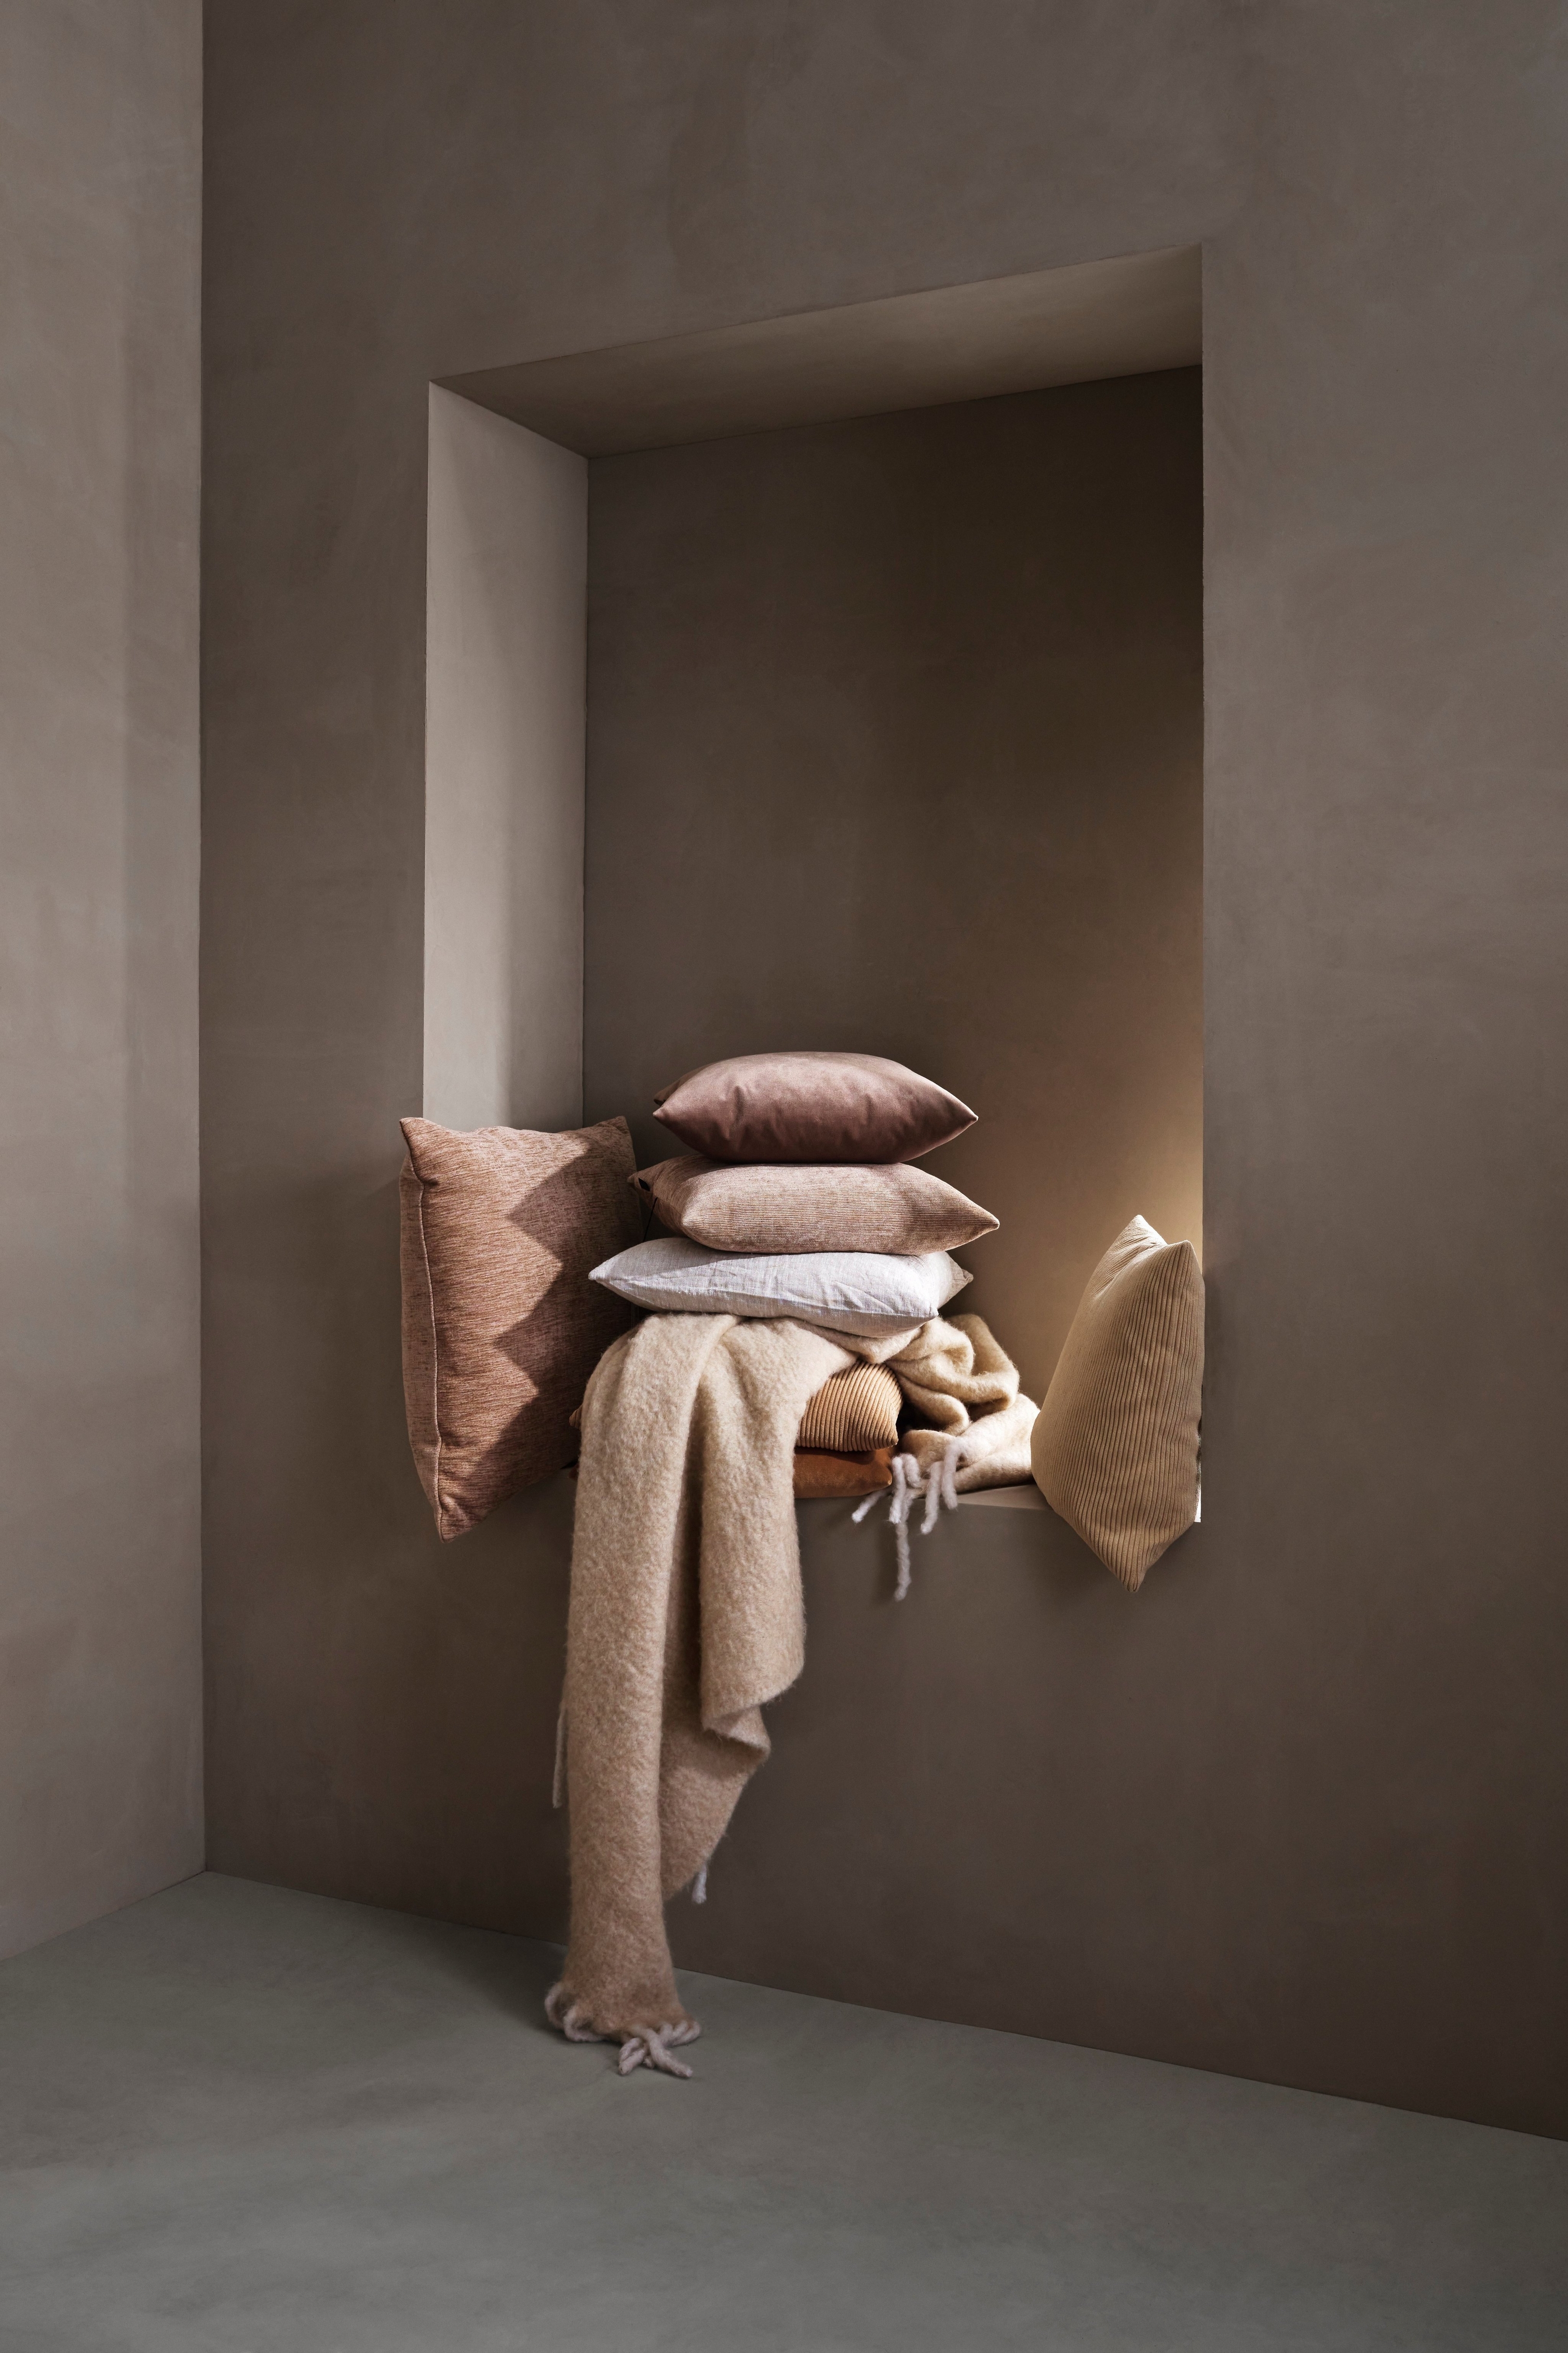 A cozy nook with piled cushions and a blanket in shades of beige and brown.